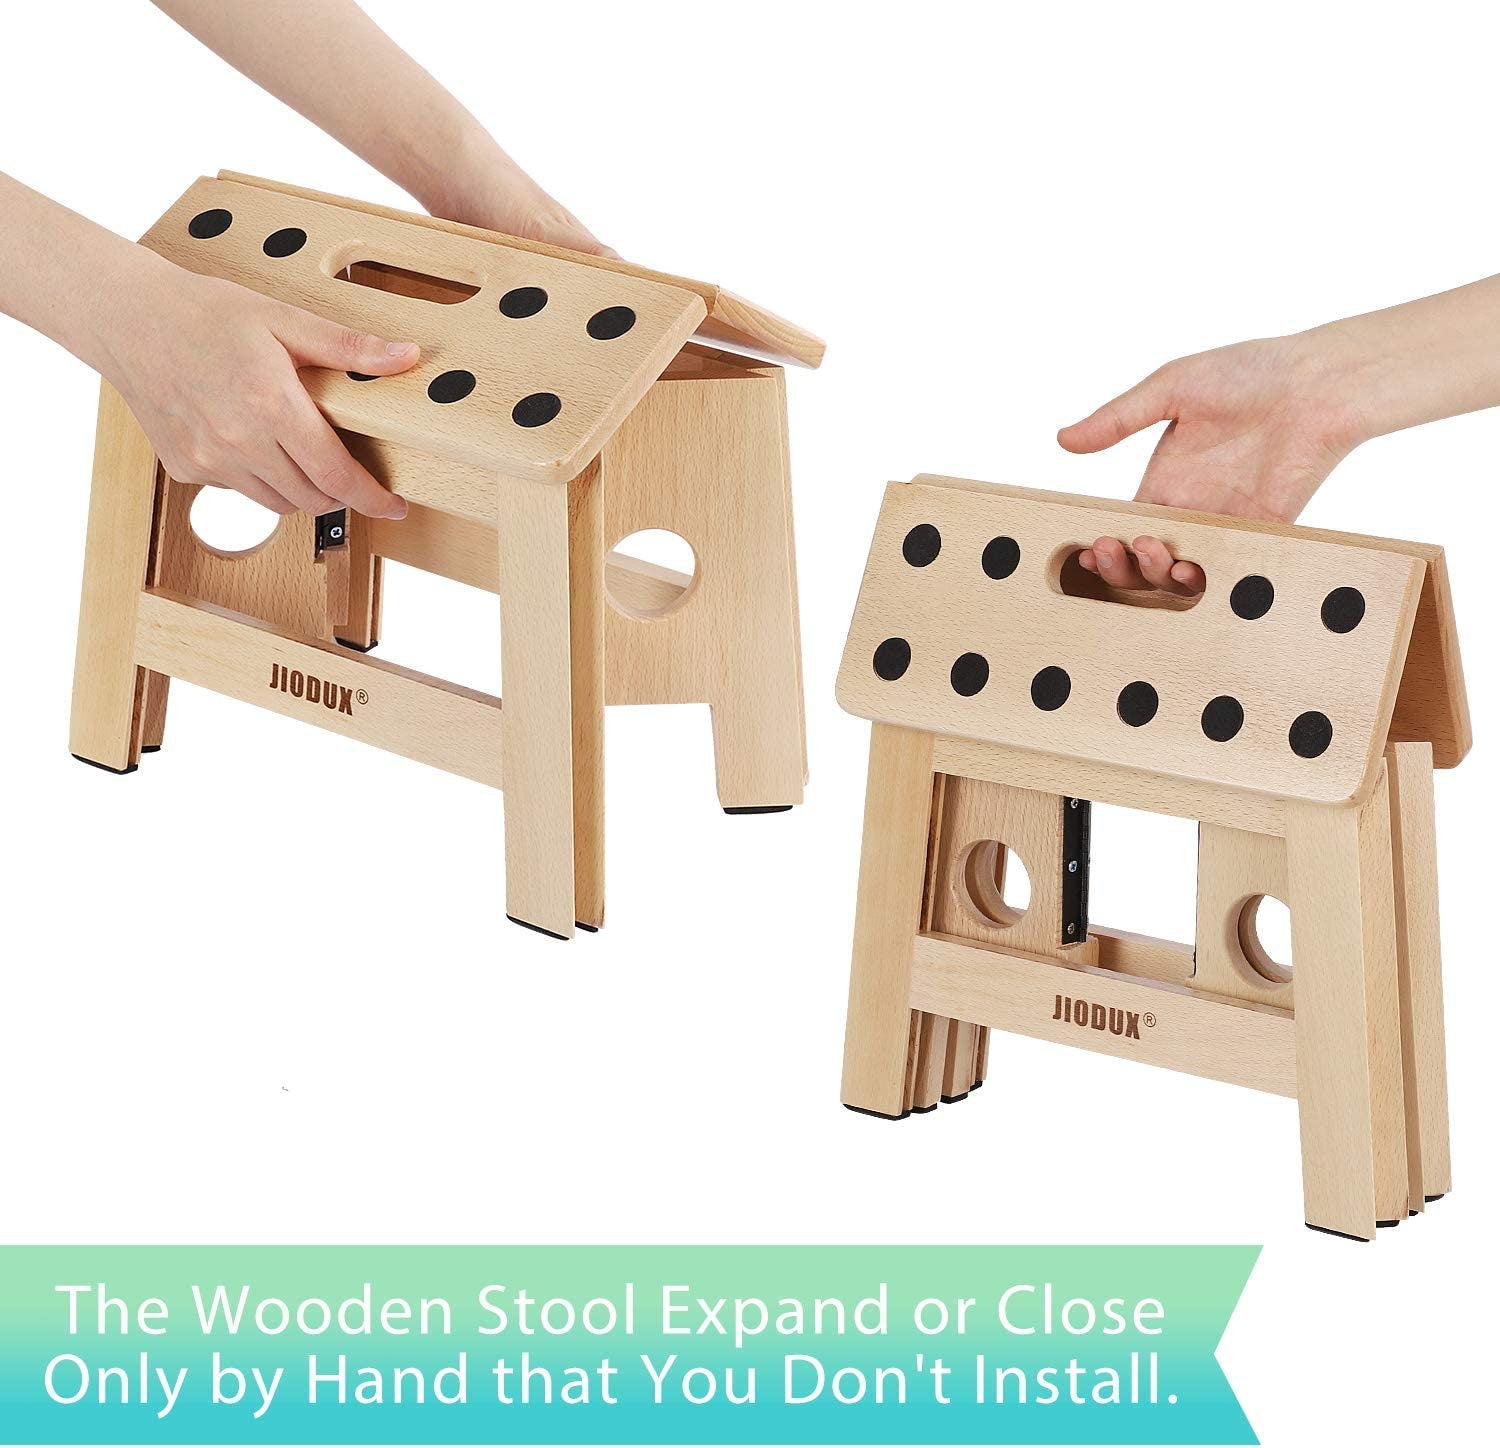 Wooden Step Stool, Non Slip Foldable Step Stool for Kids, Small Wood Stool Perfect for Kitchens Bedrooms Kids Rooms-Patented Product